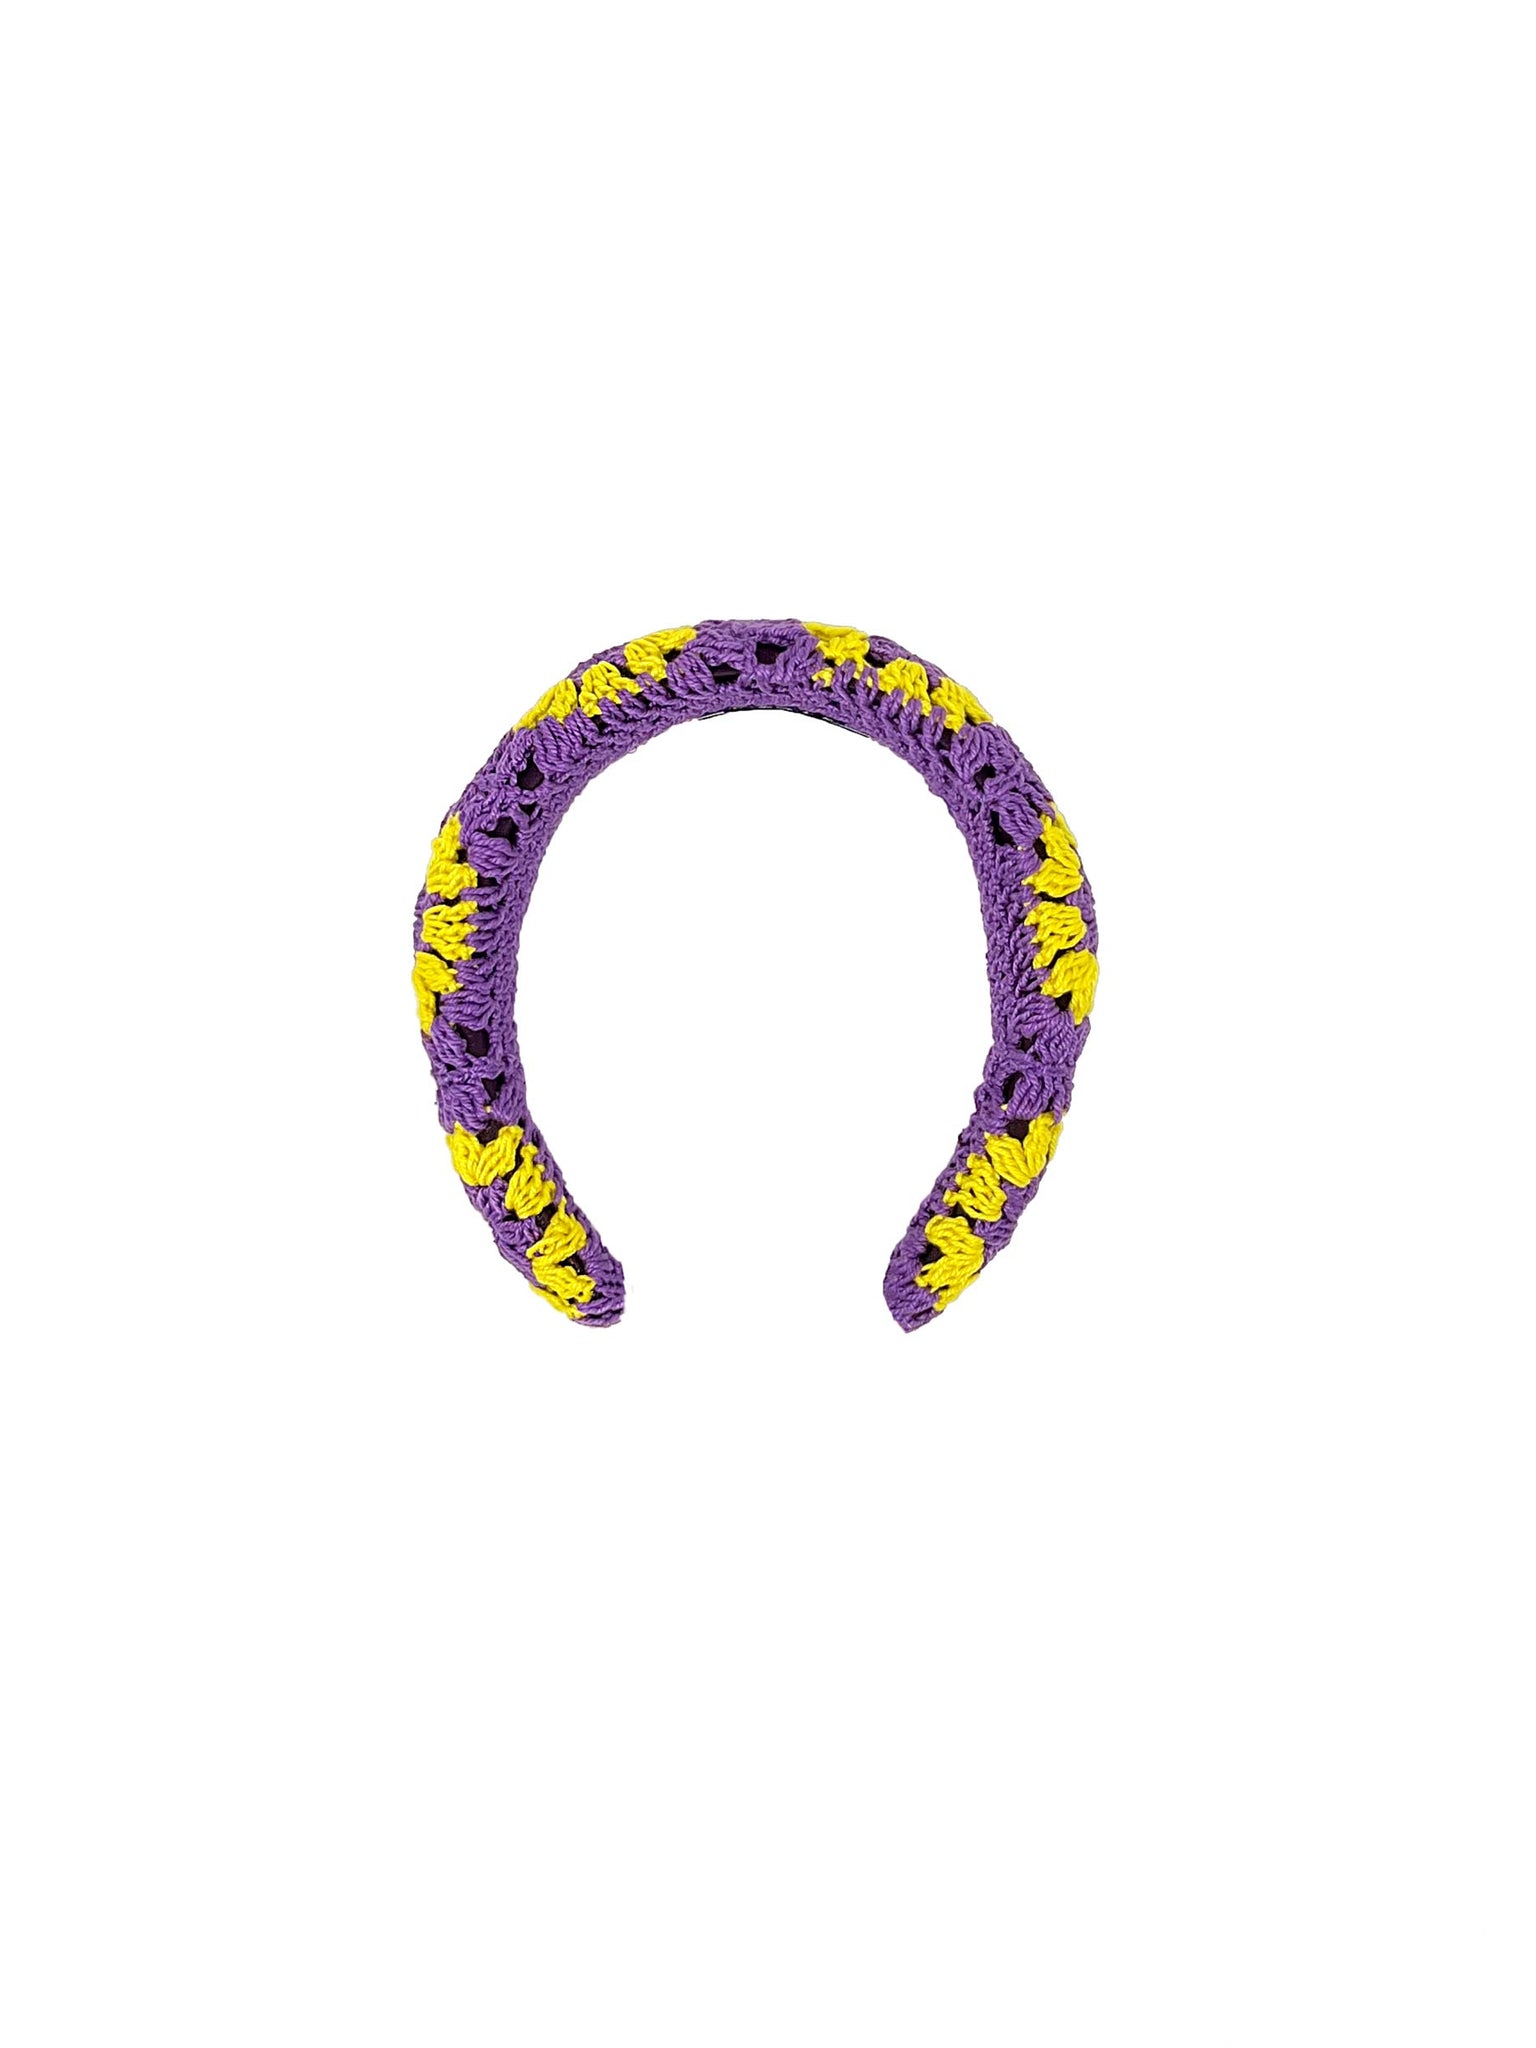 Violet and yellow crochet padded hairband